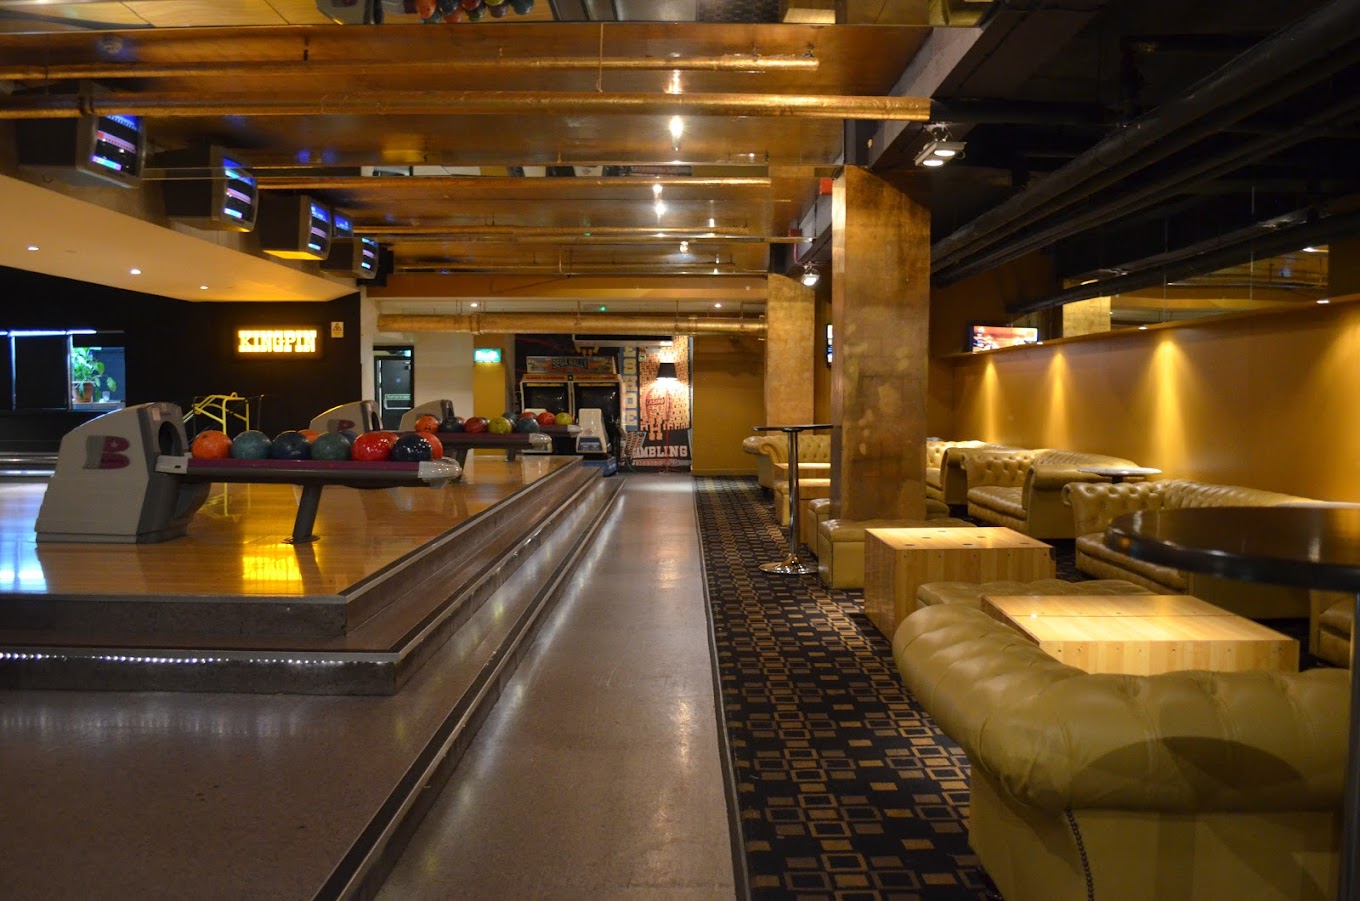 The yellow-and-black interior of the Kingpin Lounge, featuring yellow leather sofas and private bowling lanes.